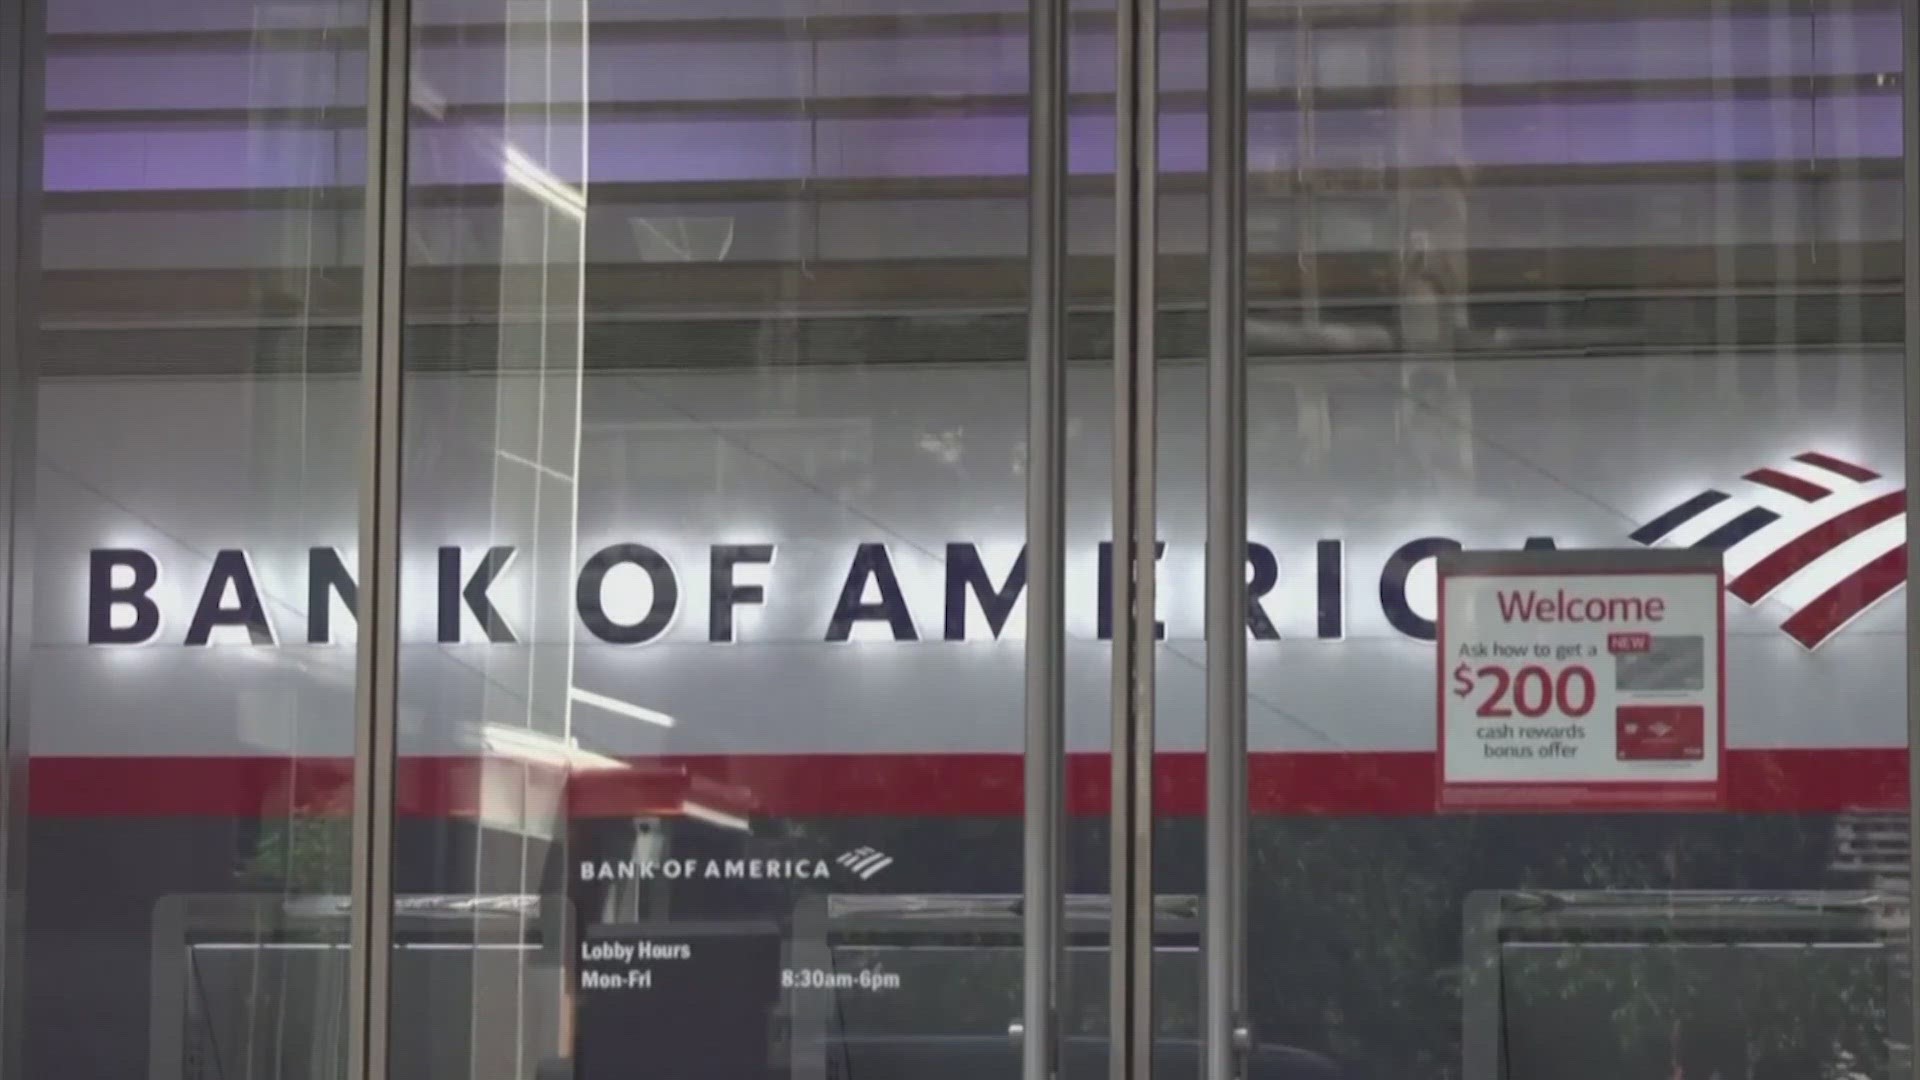 Bank of America to pay over $250 million over junk fees, other issues